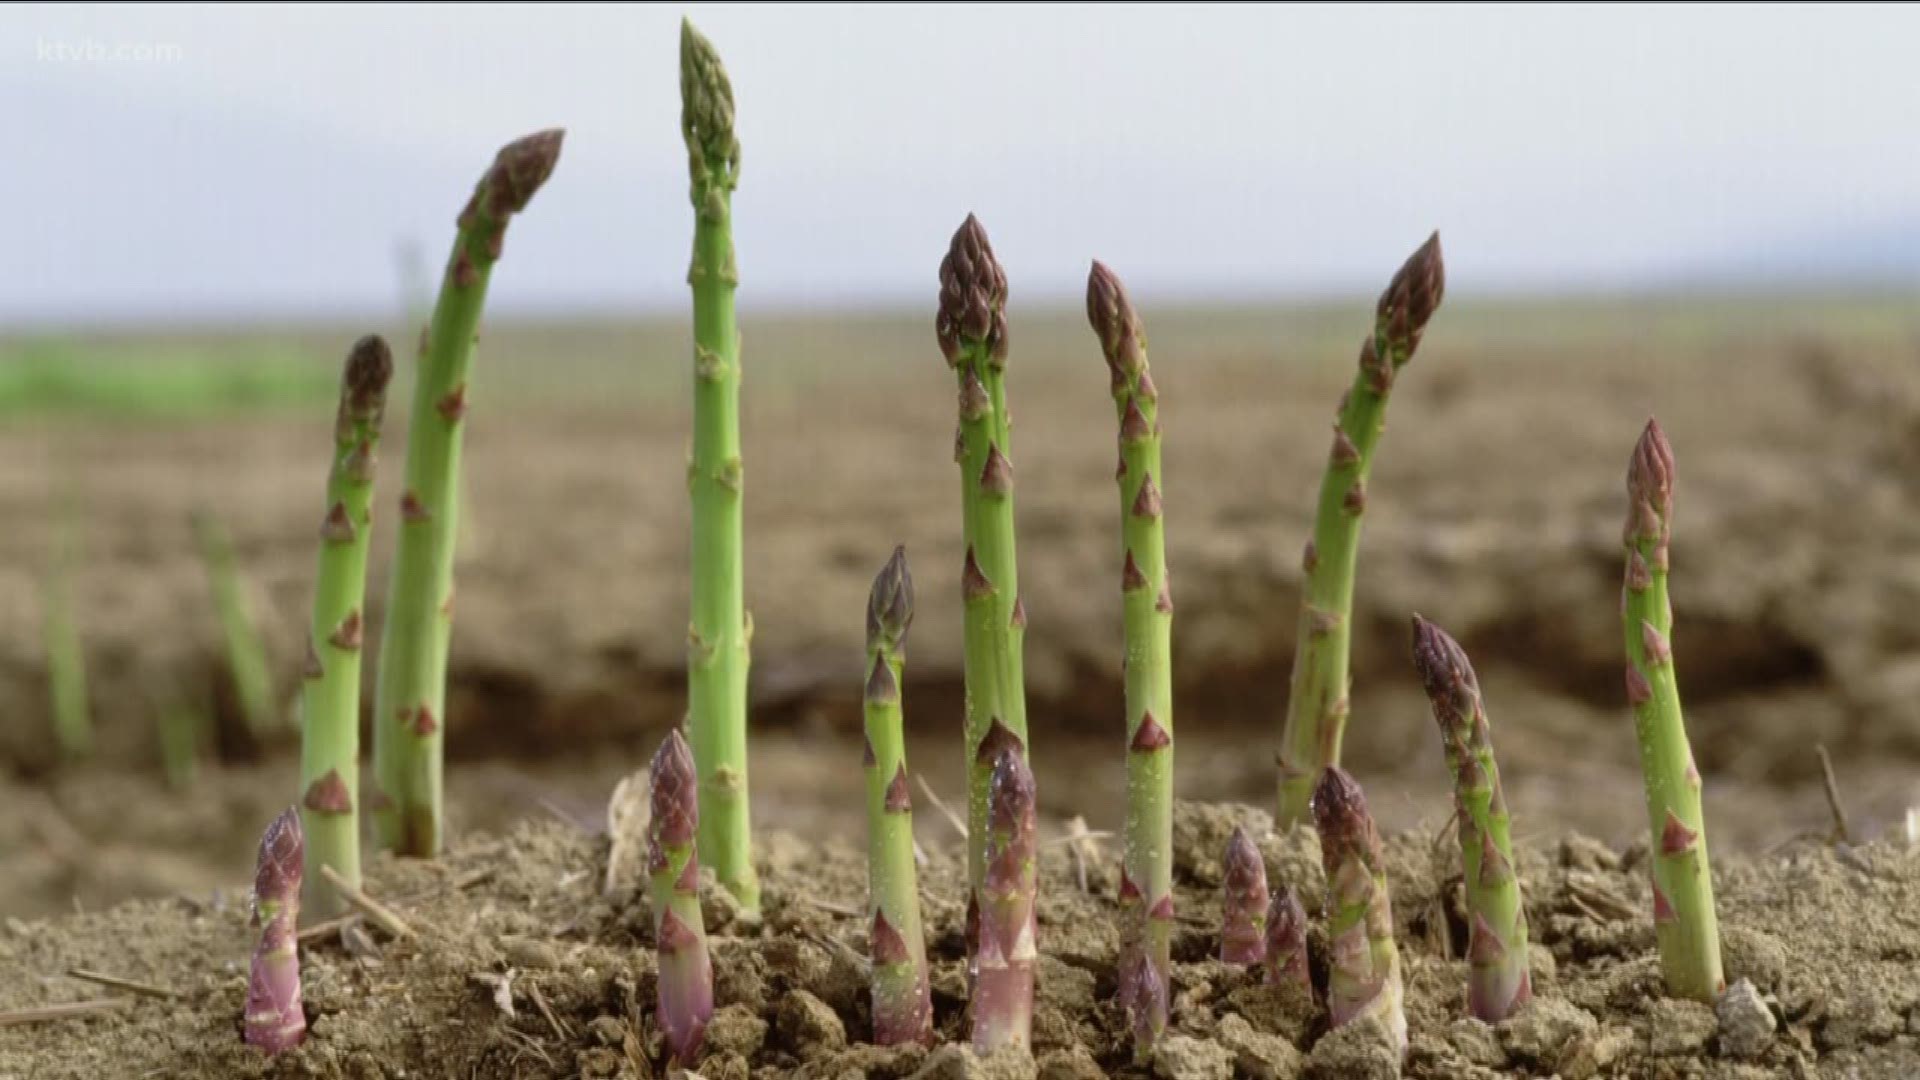 Jim Duthie shows us how to get started growing asparagus.